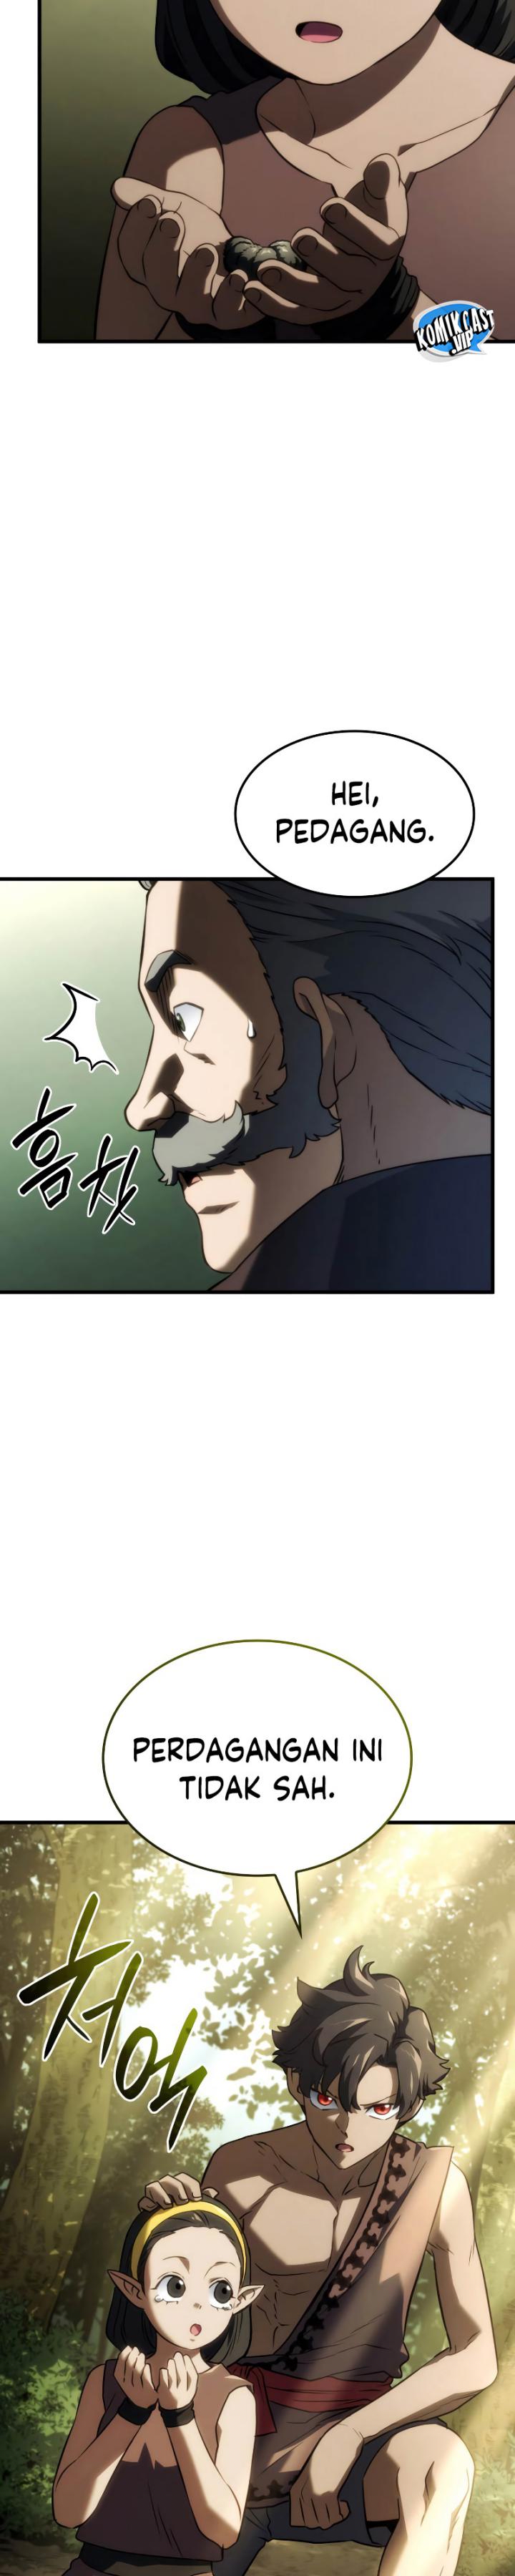 Revenge Of The Iron-blooded Sword Hound Chapter 38